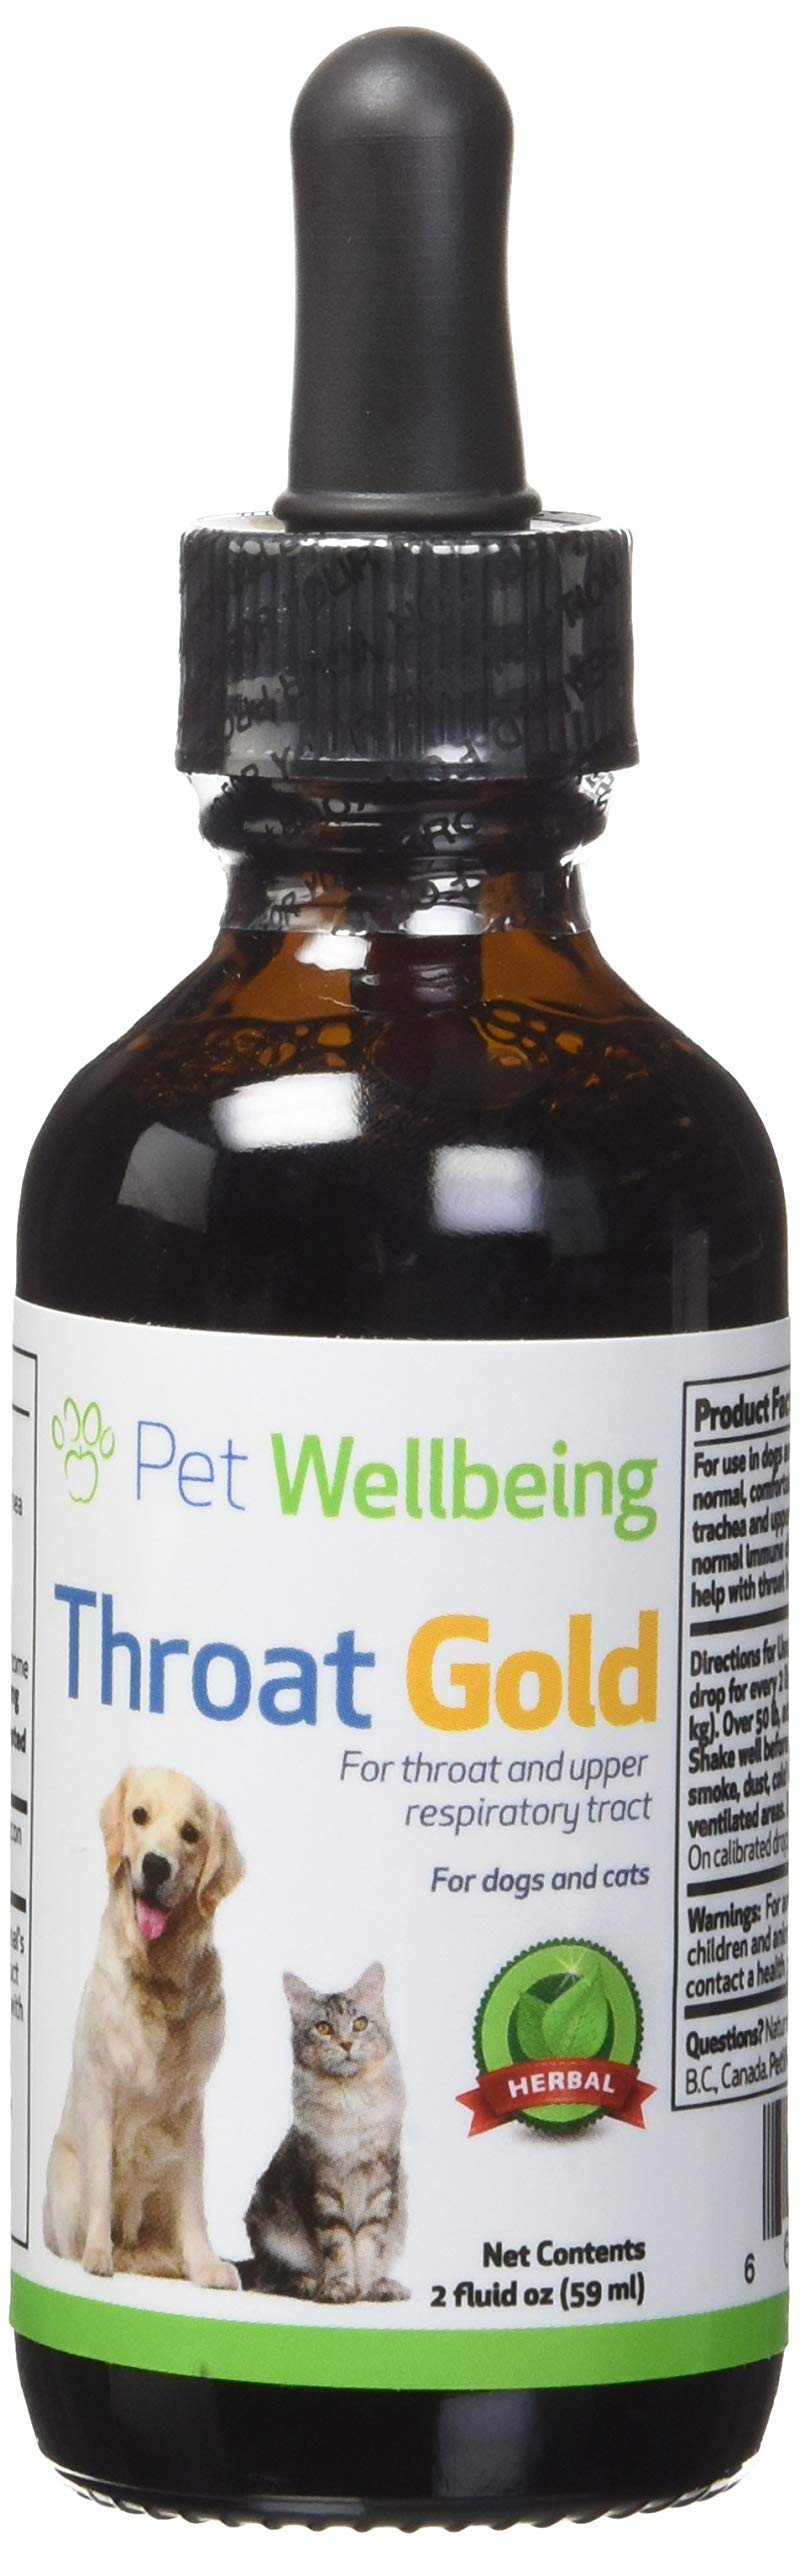 Mua Pet Wellbeing - Throat Gold for Dogs - Natural Herbal Throat and Respiratory Support in Dogs - 2 oz (59ml) trên Amazon Mỹ chính hãng 2022 | Fado